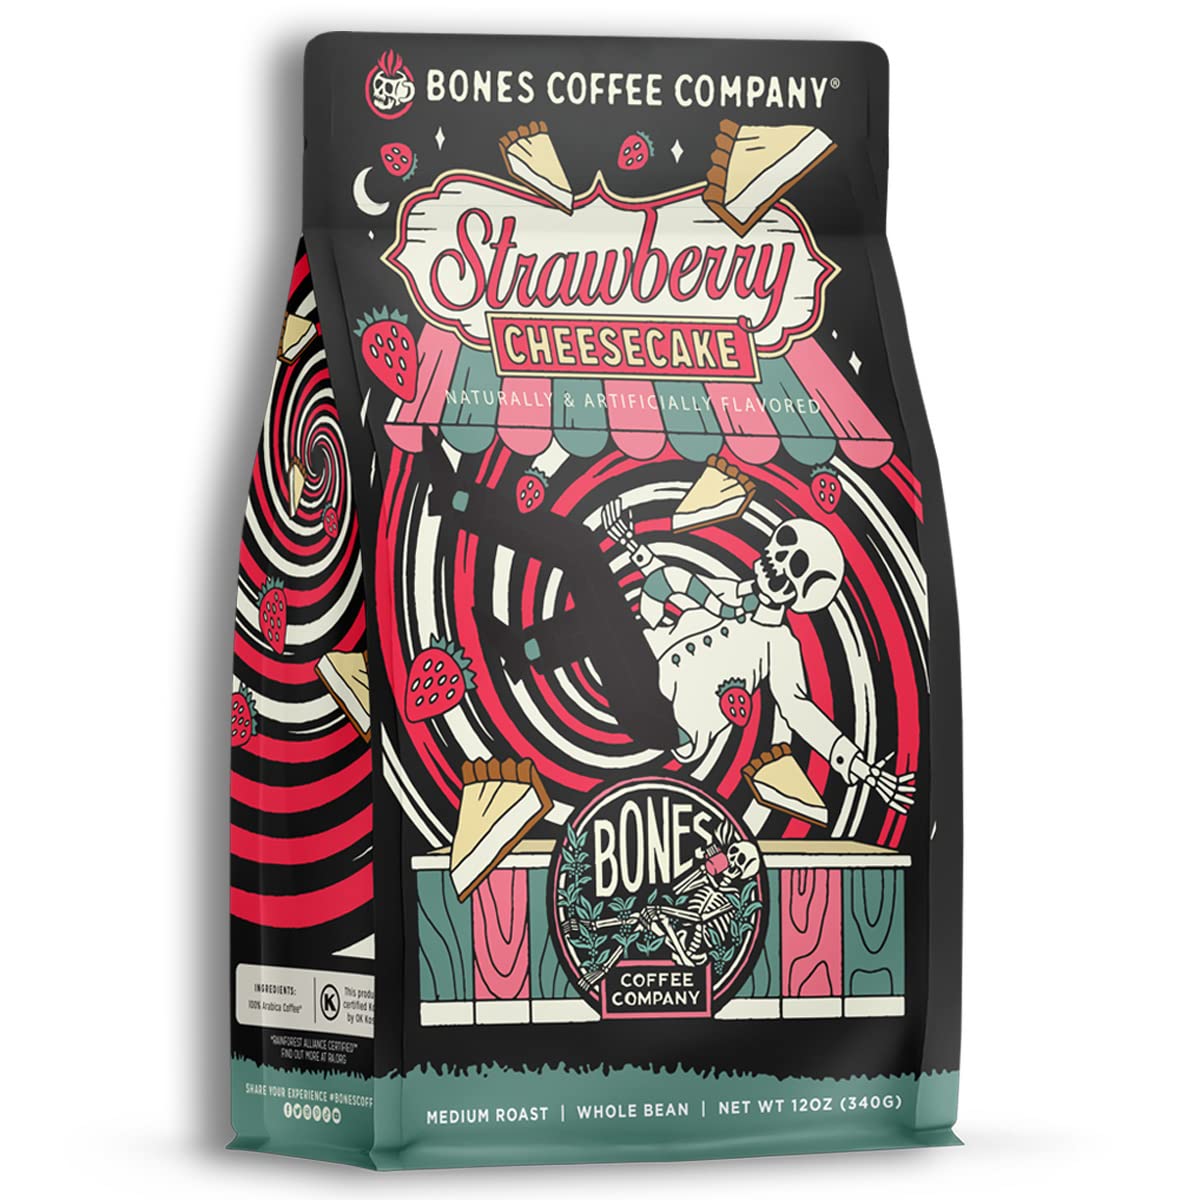 Bones Coffee Company Strawberry Cheesecake Whole Coffee Beans | 12 oz Medium Roast Low Acid Coffee | Flavored Coffee Gifts & Gourmet Coffee Beverages (Whole Bean)